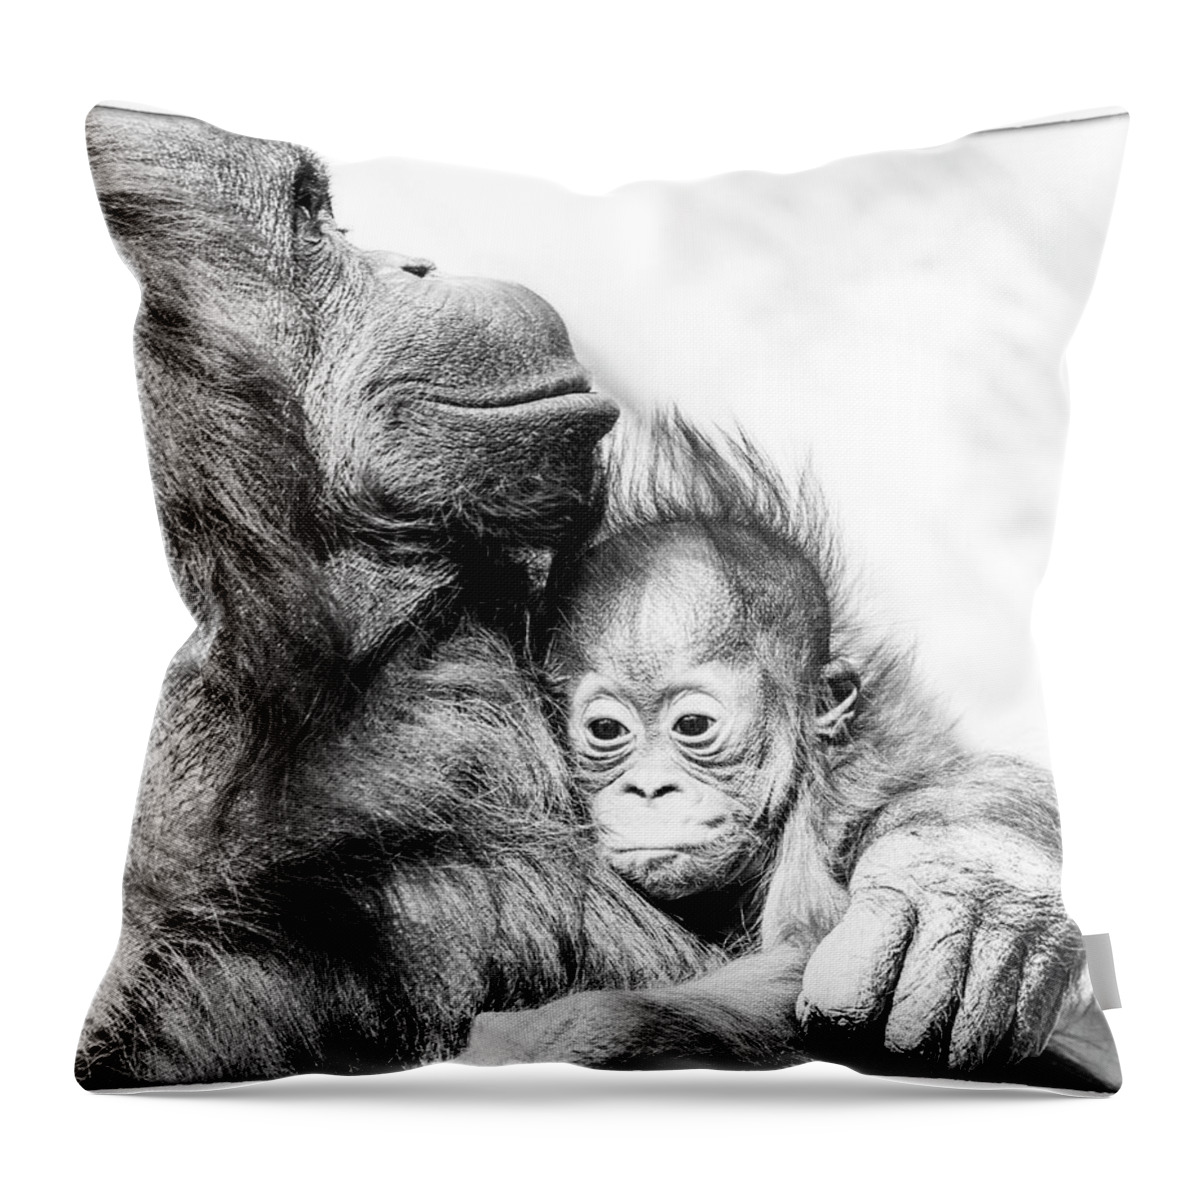 Crystal Yingling Throw Pillow featuring the photograph Contentment by Ghostwinds Photography